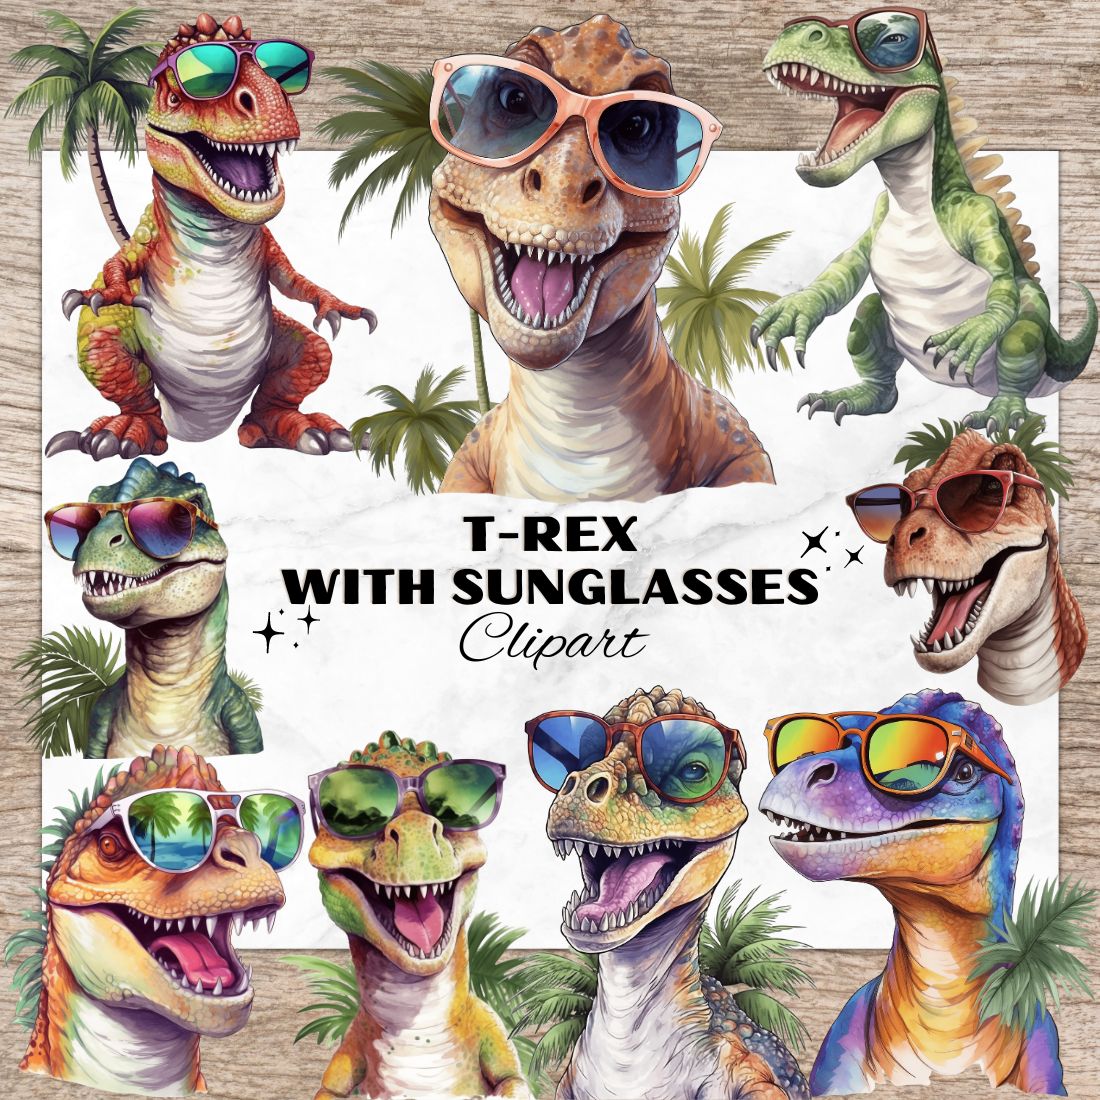 9 T-Rex with Sunglasses PNG, Watercolor Clipart, Dinosaur with Glasses, Transparent PNG, Digital Paper Craft, Watercolor Clipart for Scrapbook, Invitation, Wall Art, T-Shirt Design cover image.